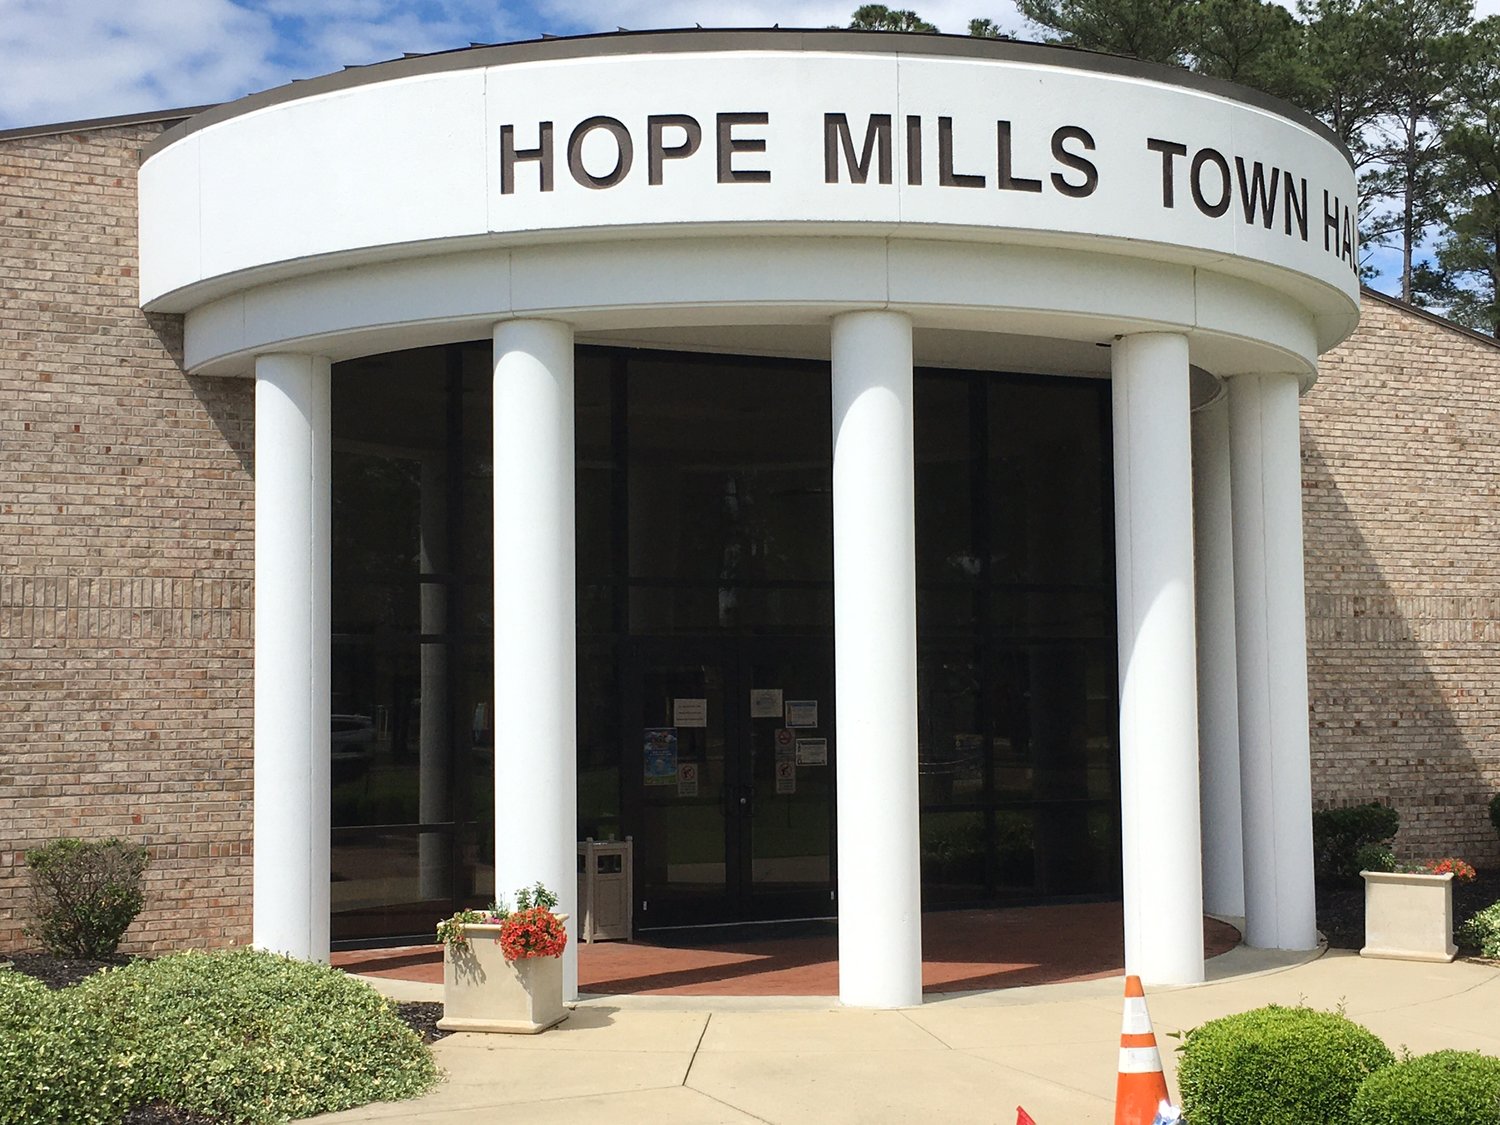 The Hope Mills Board of Commissioners is expected to consider a non-contiguous annexation and receive an update on the public safety building during tonight’s meeting.